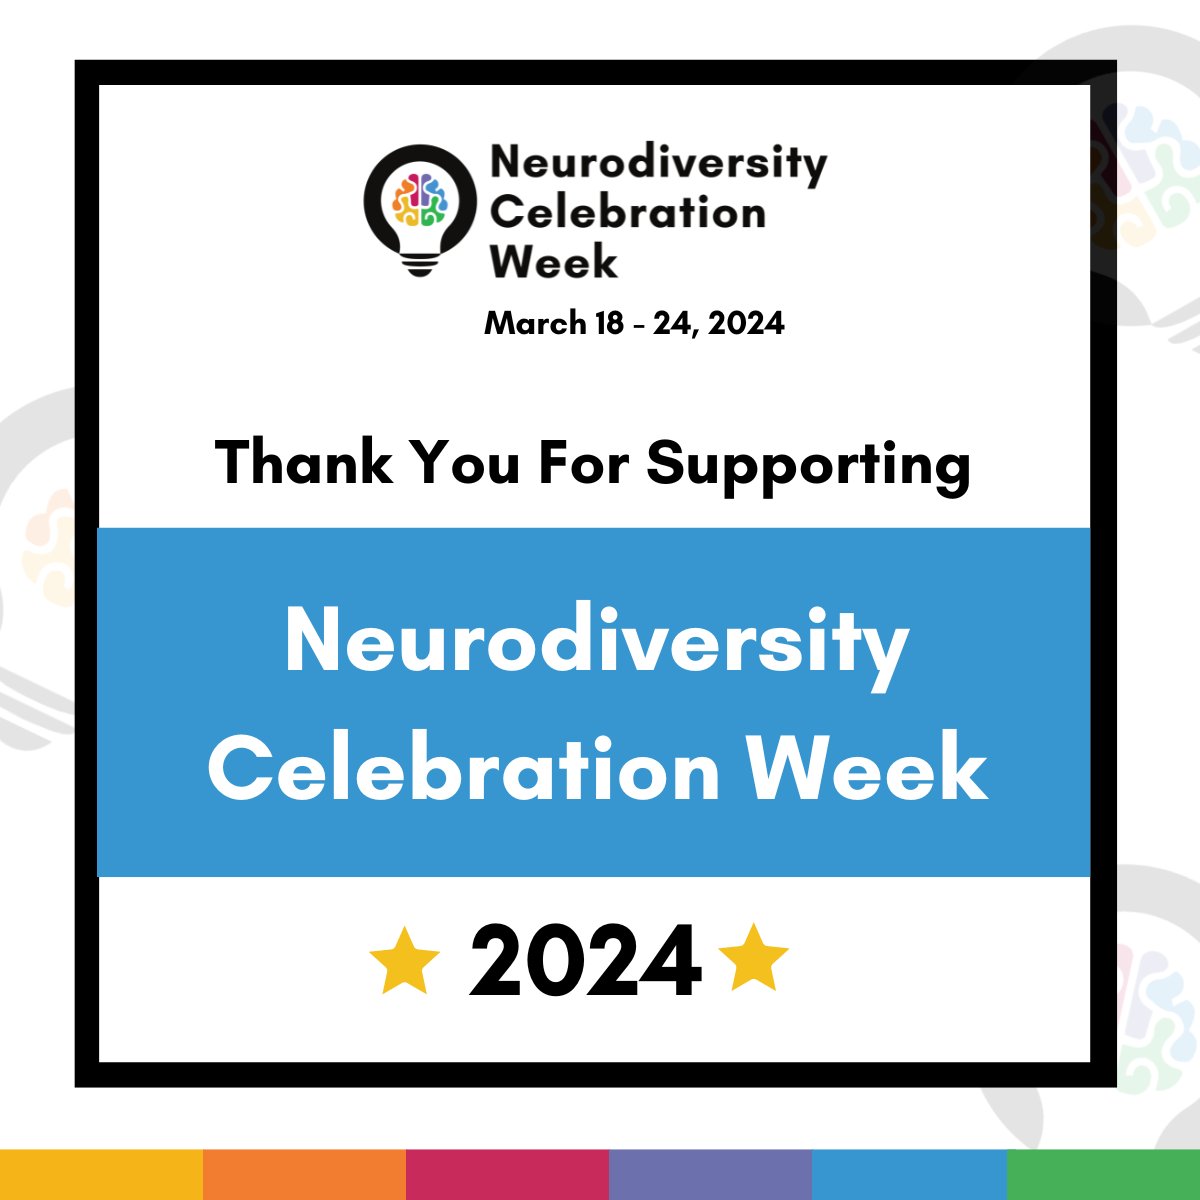 That’s a wrap on #NeurodiversityCelebrationWeek 2024! 🌟 A huge thank you to everyone who showed their support, shared their stories & celebrated different minds, including the event Chairs, Panellists & everyone who attended the events. #NeurodiversityWeek #NCW #ThisIsND